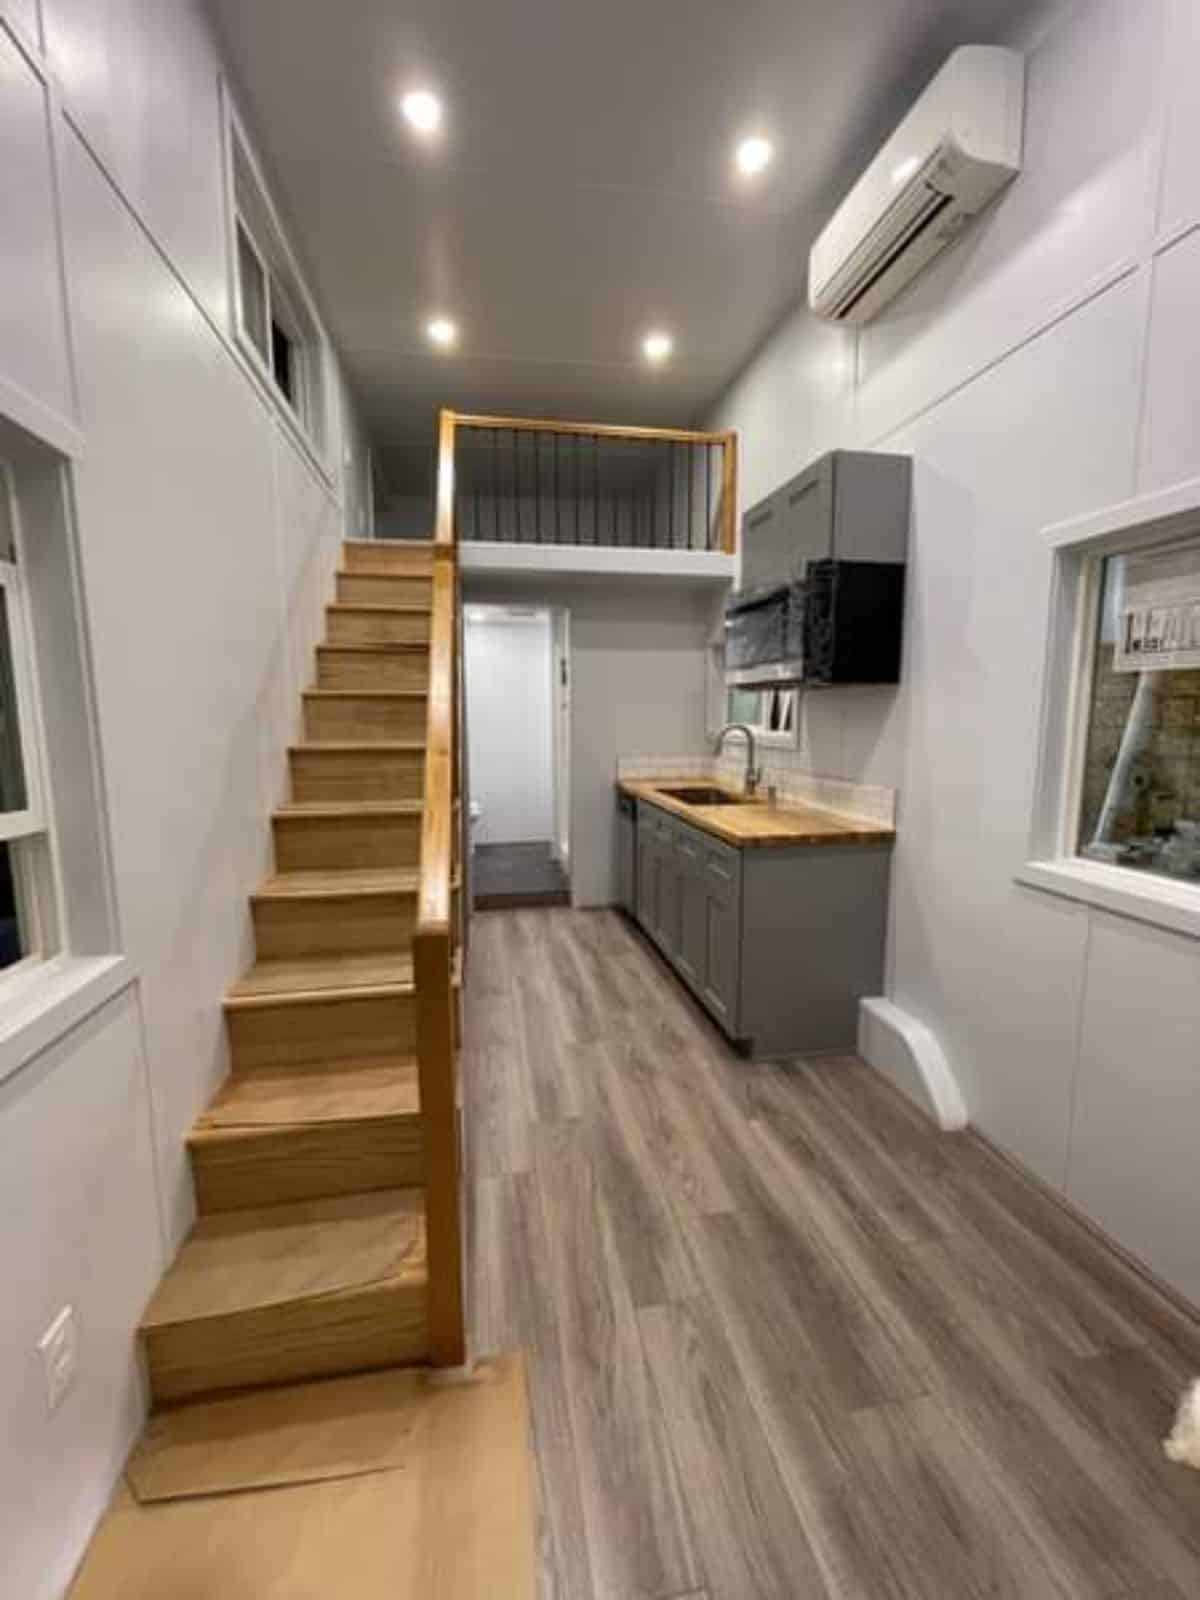 Stairs leading to to loft bedroom of Brand-New Tiny Home and air condition unit is installed included in the deal